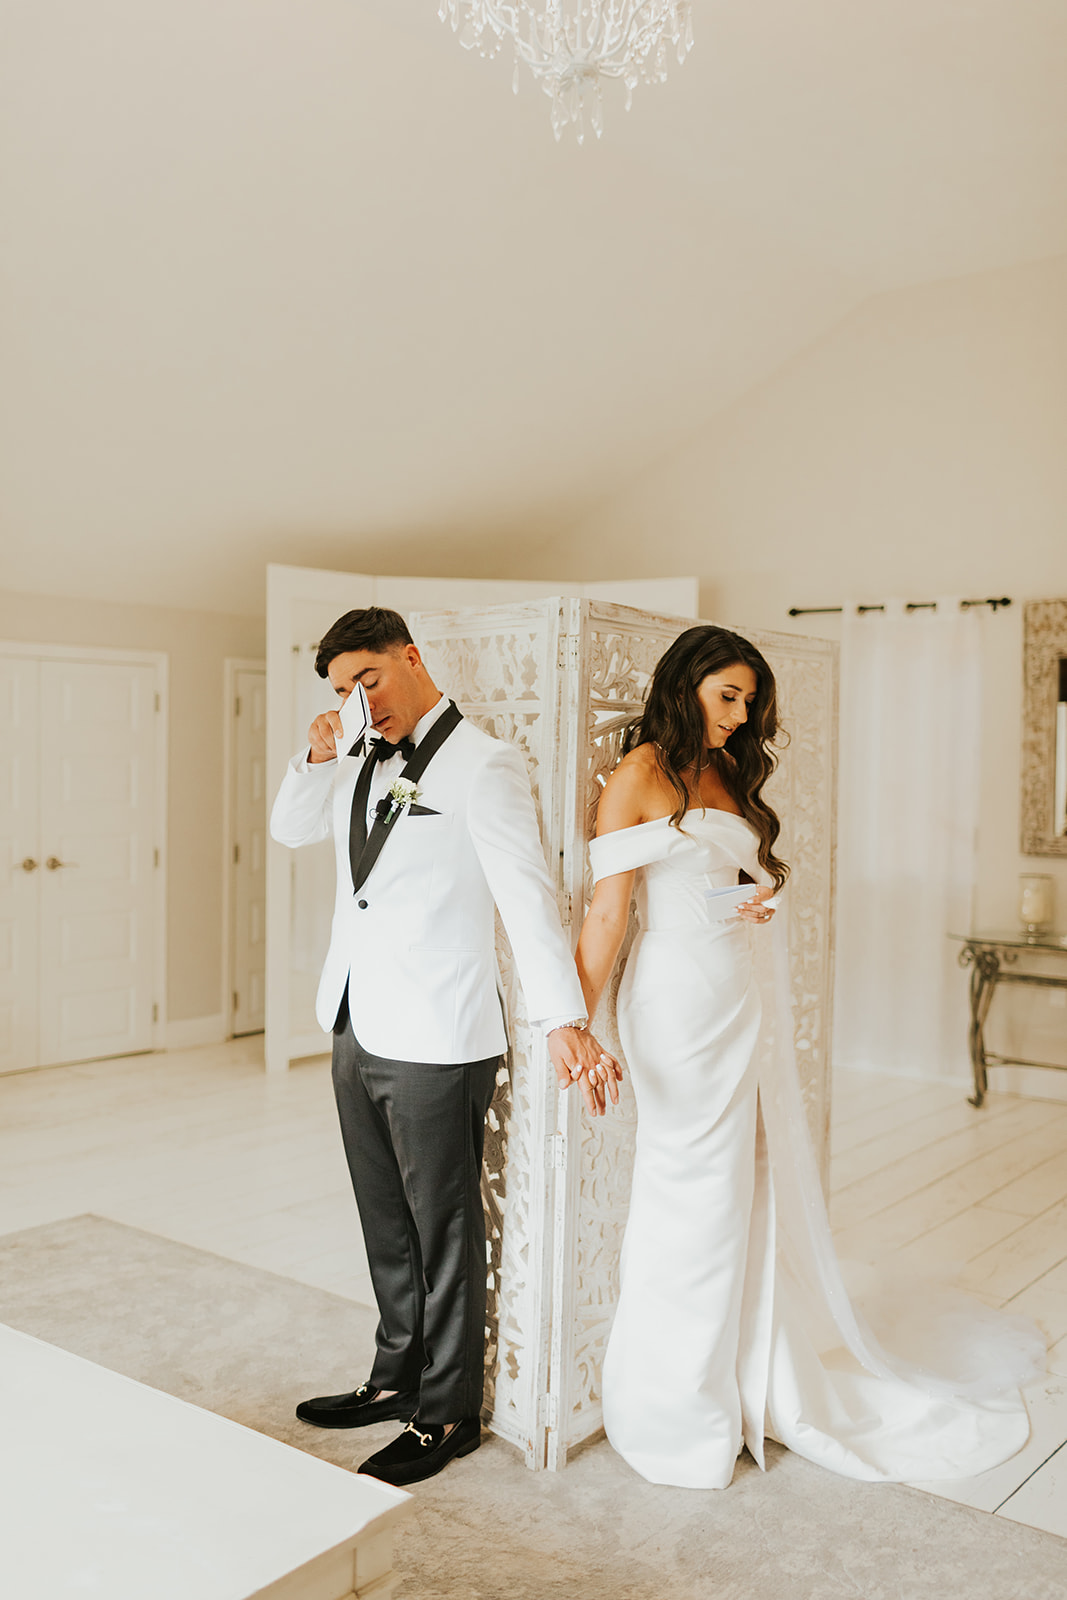 Bride and Groom say emotional private vows before their ceremony